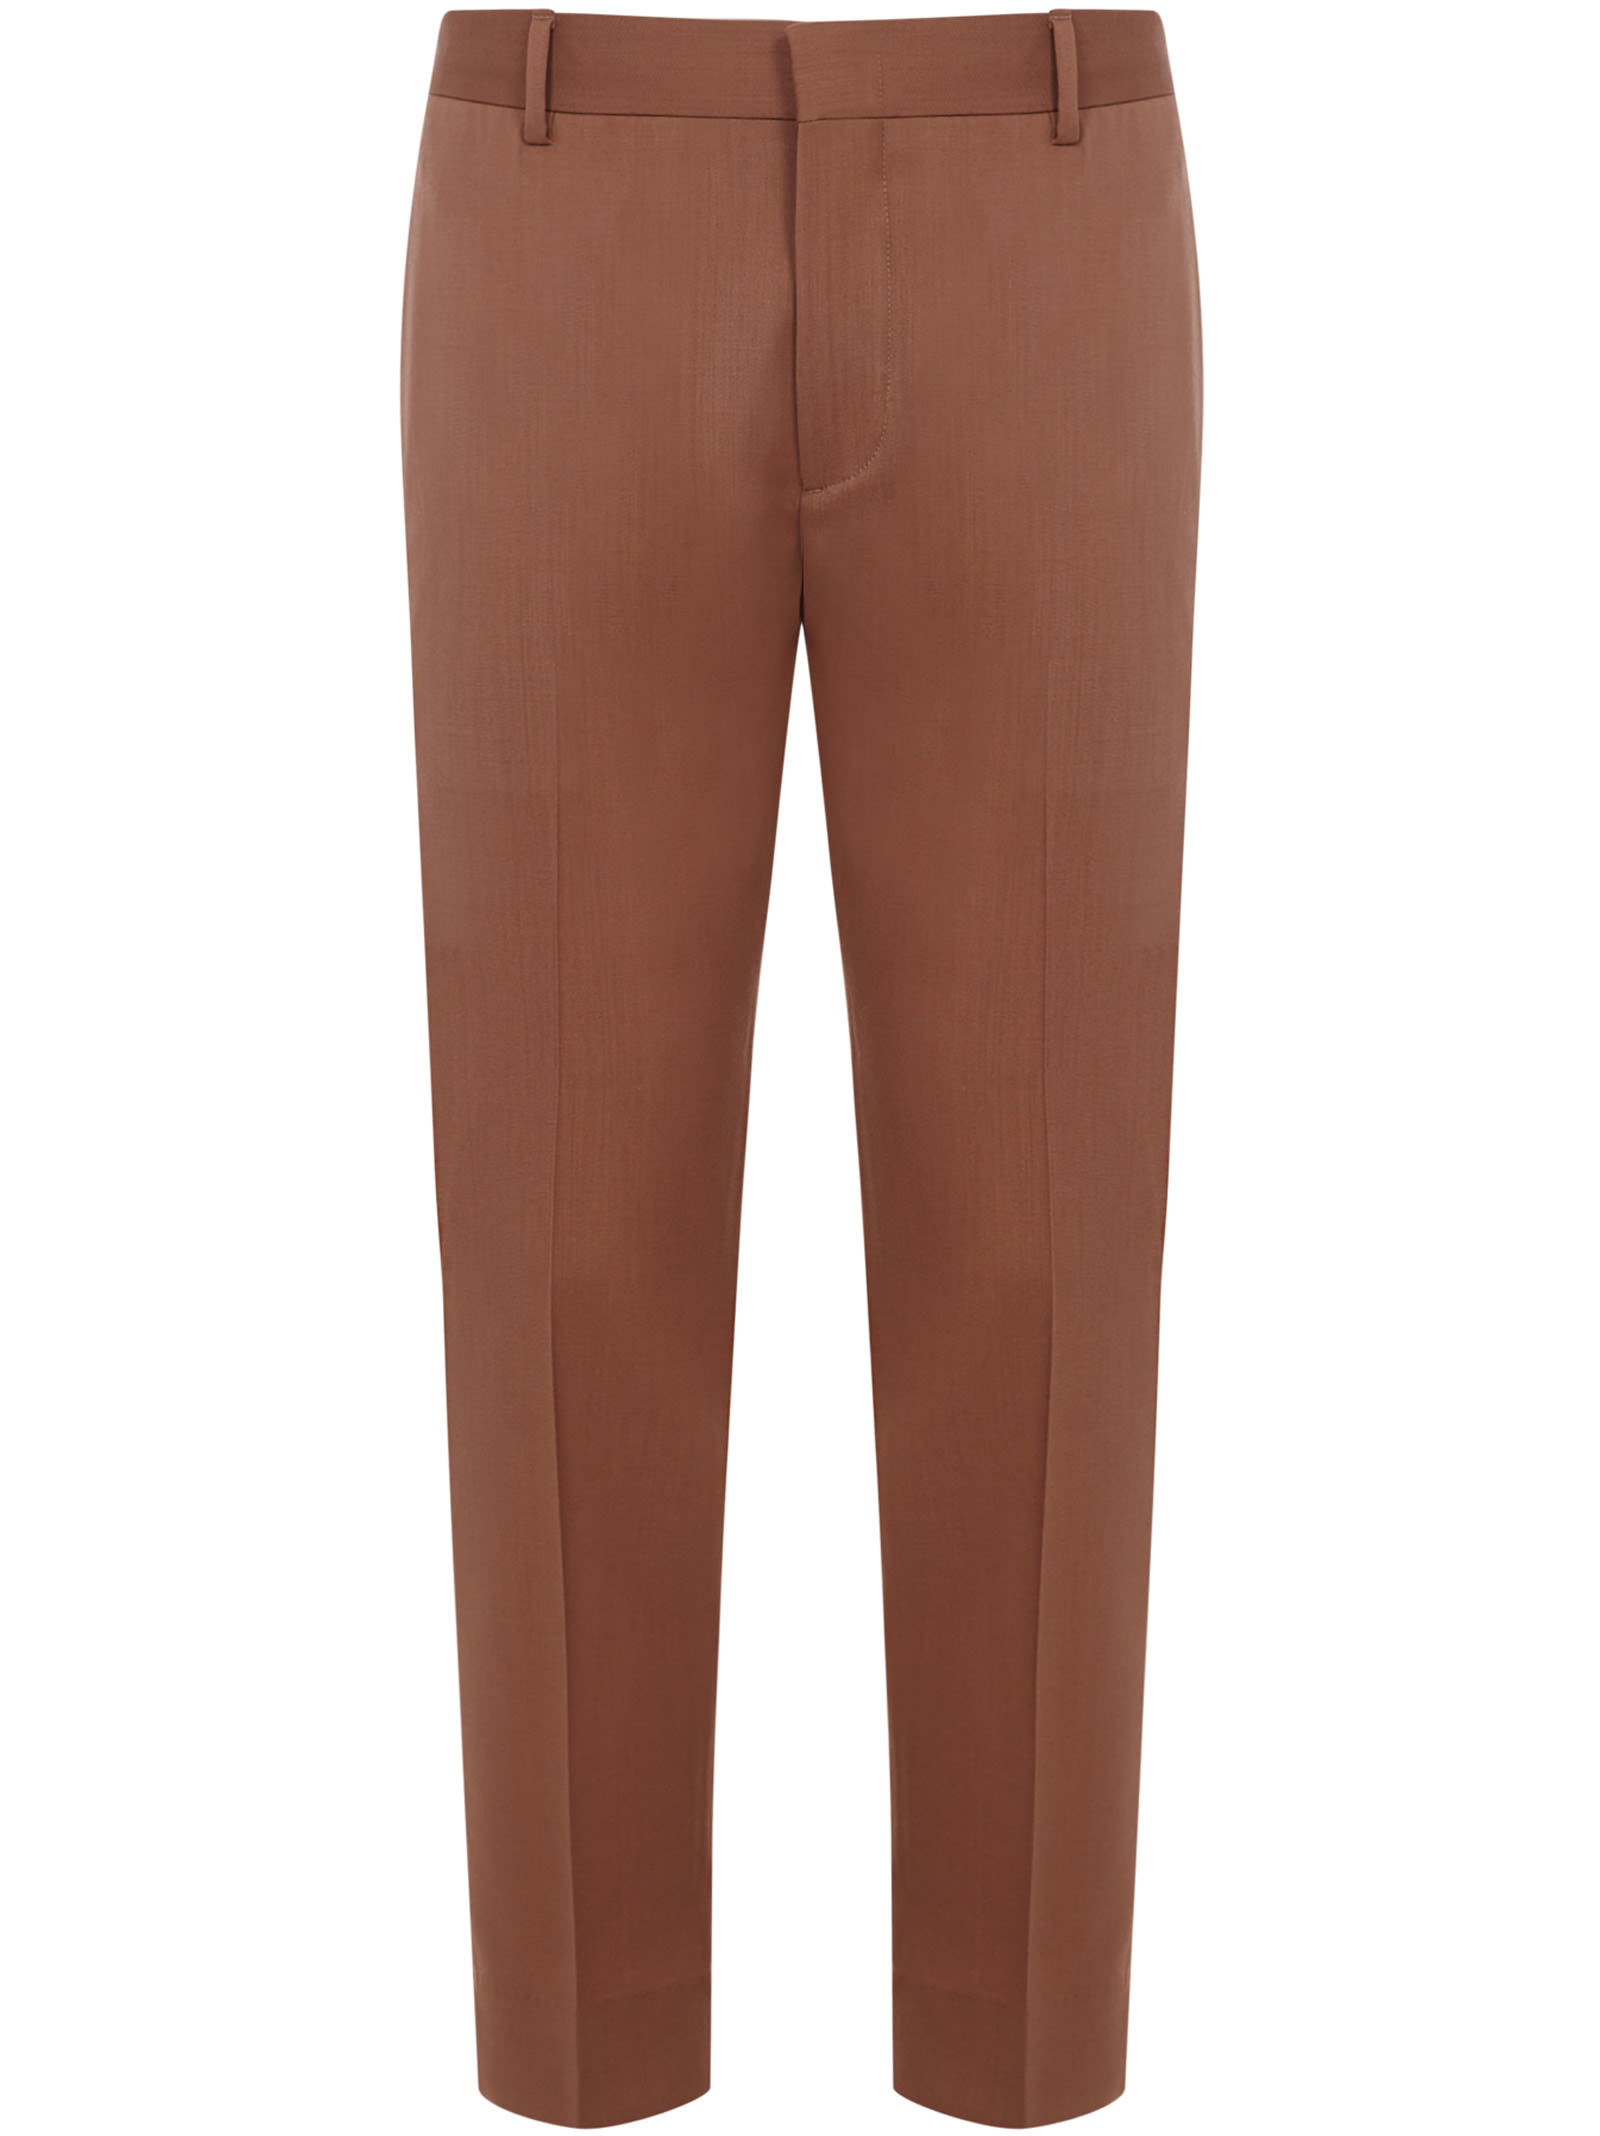 Be Able Trousers In Tobacco